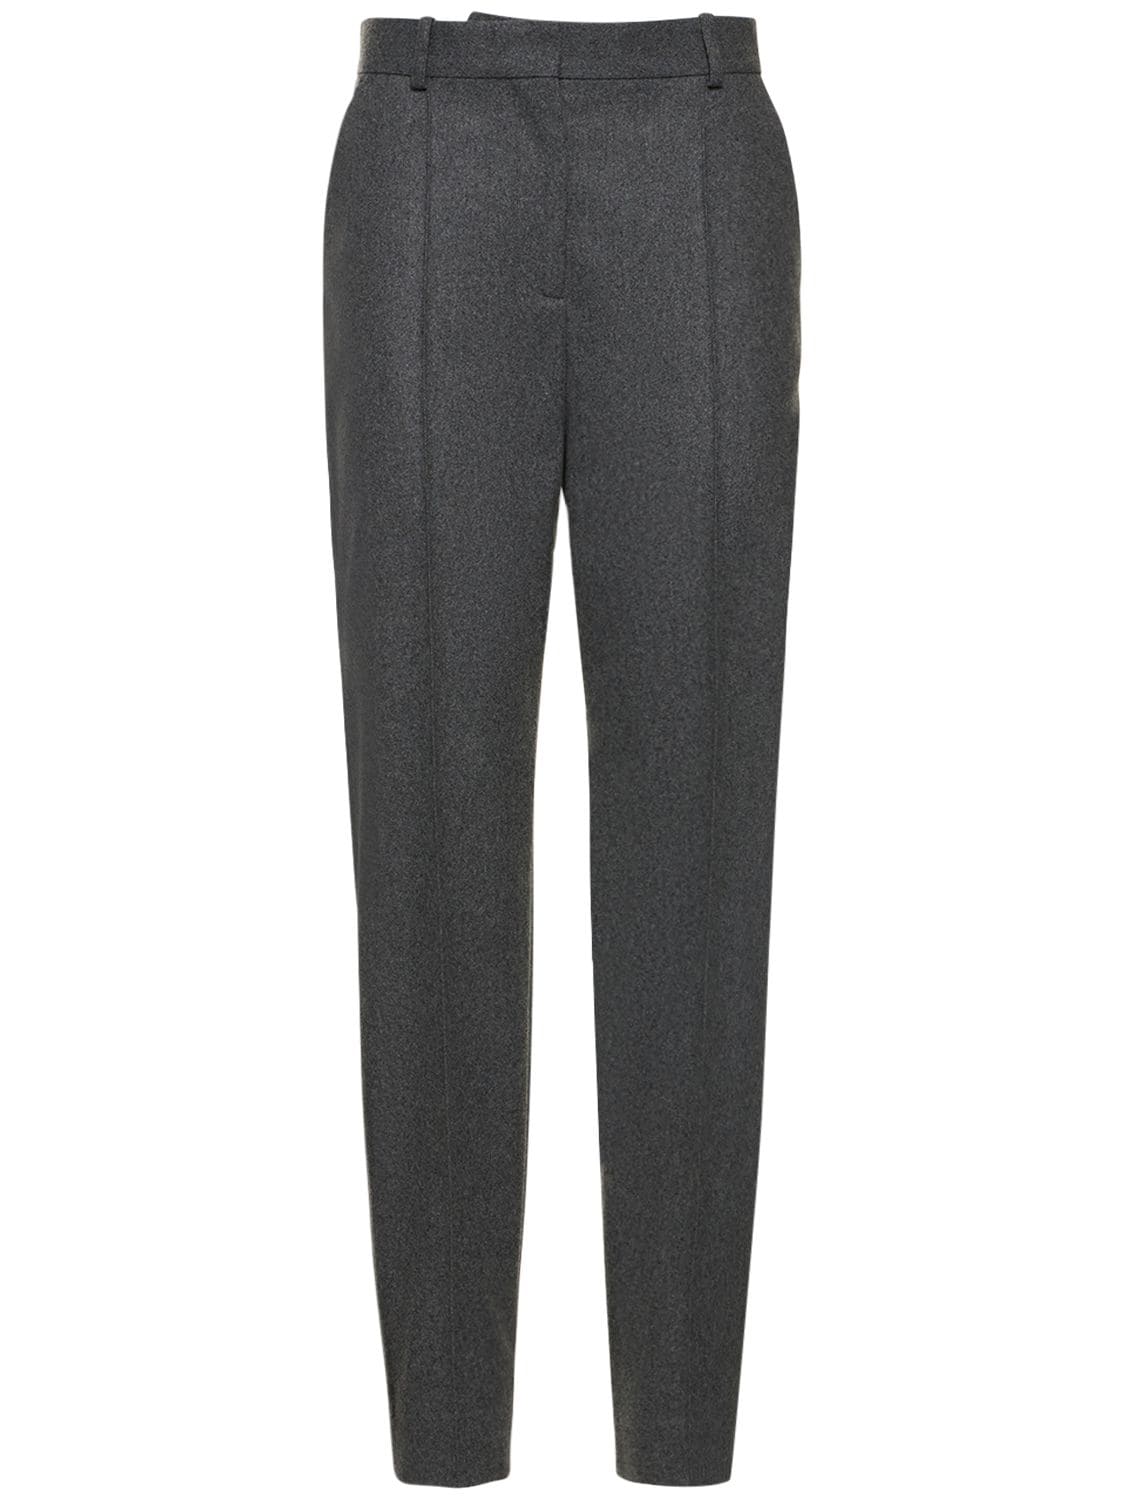 Image of Pleated Tailored Wool Blend Pants